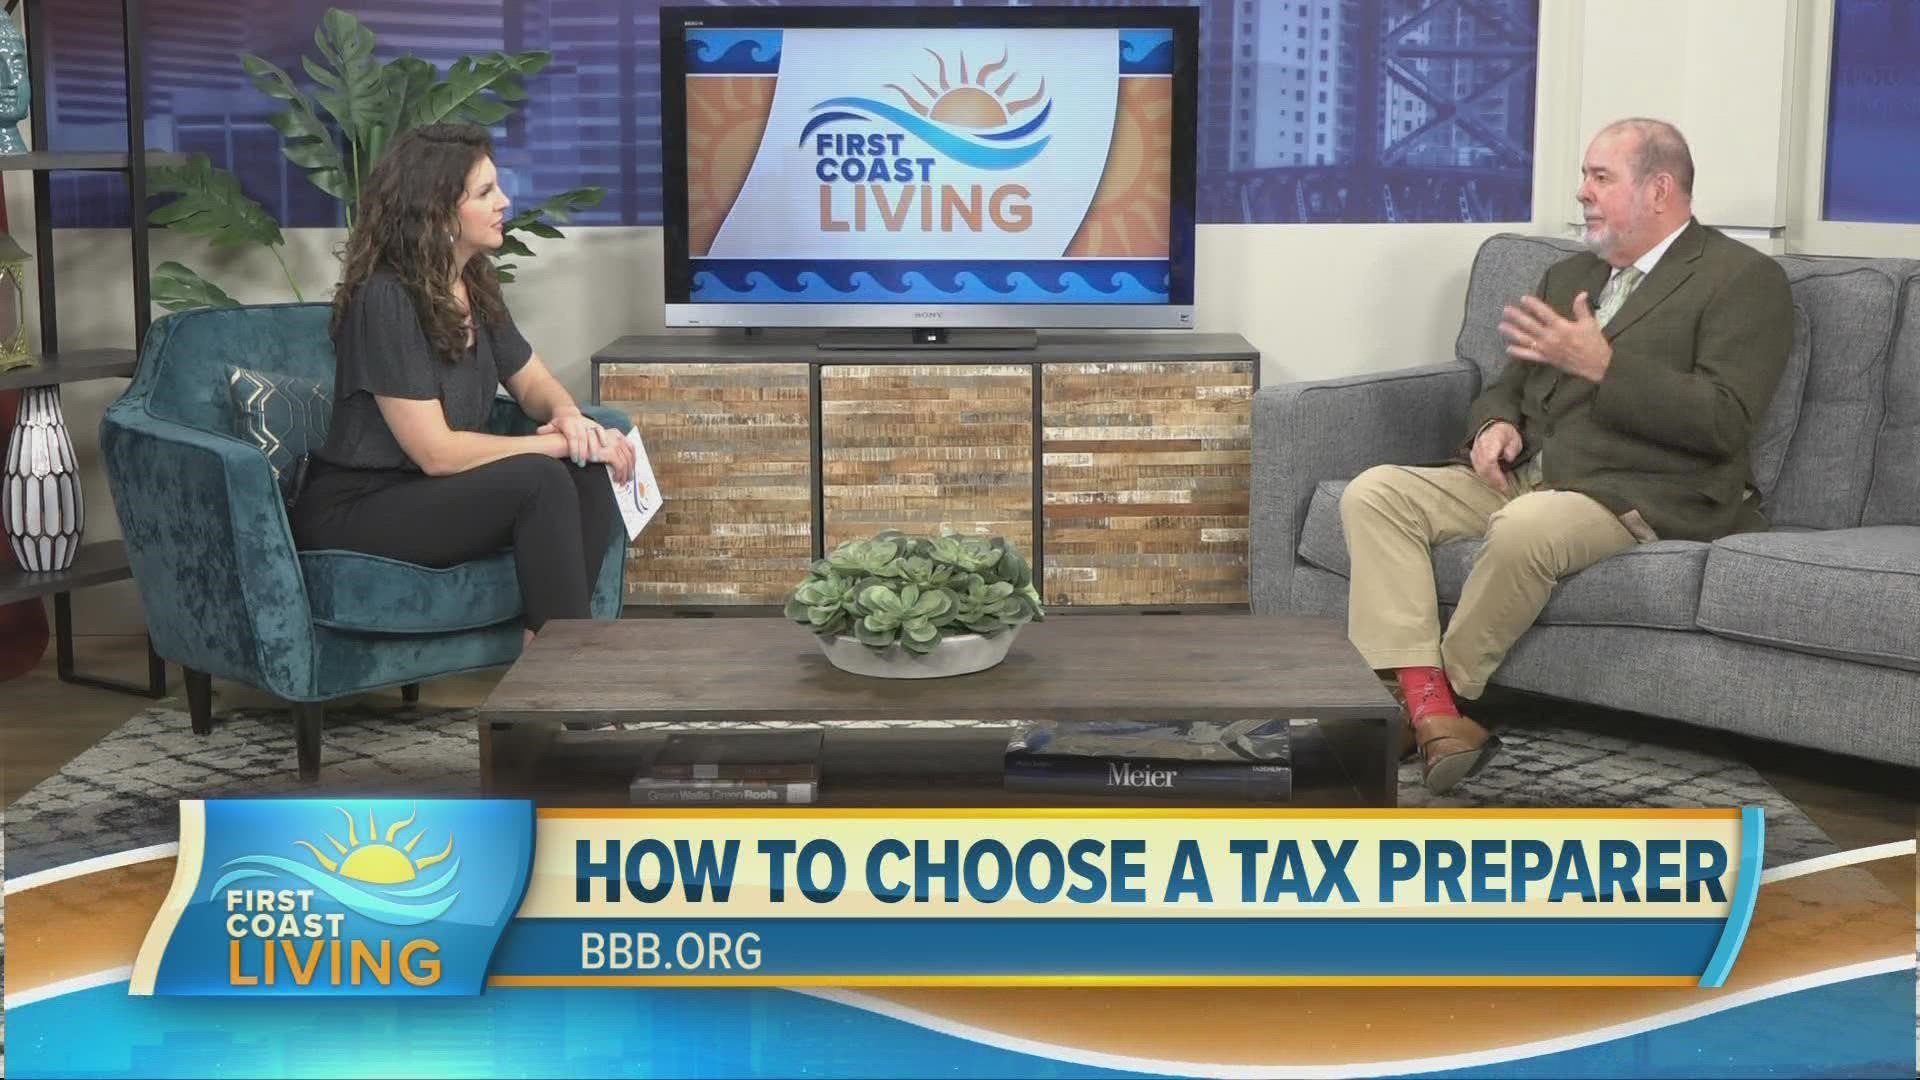 President of the Better Business Bureau of Northeast Florida, Tom Stephens shares how to find the right tax preparer for you.